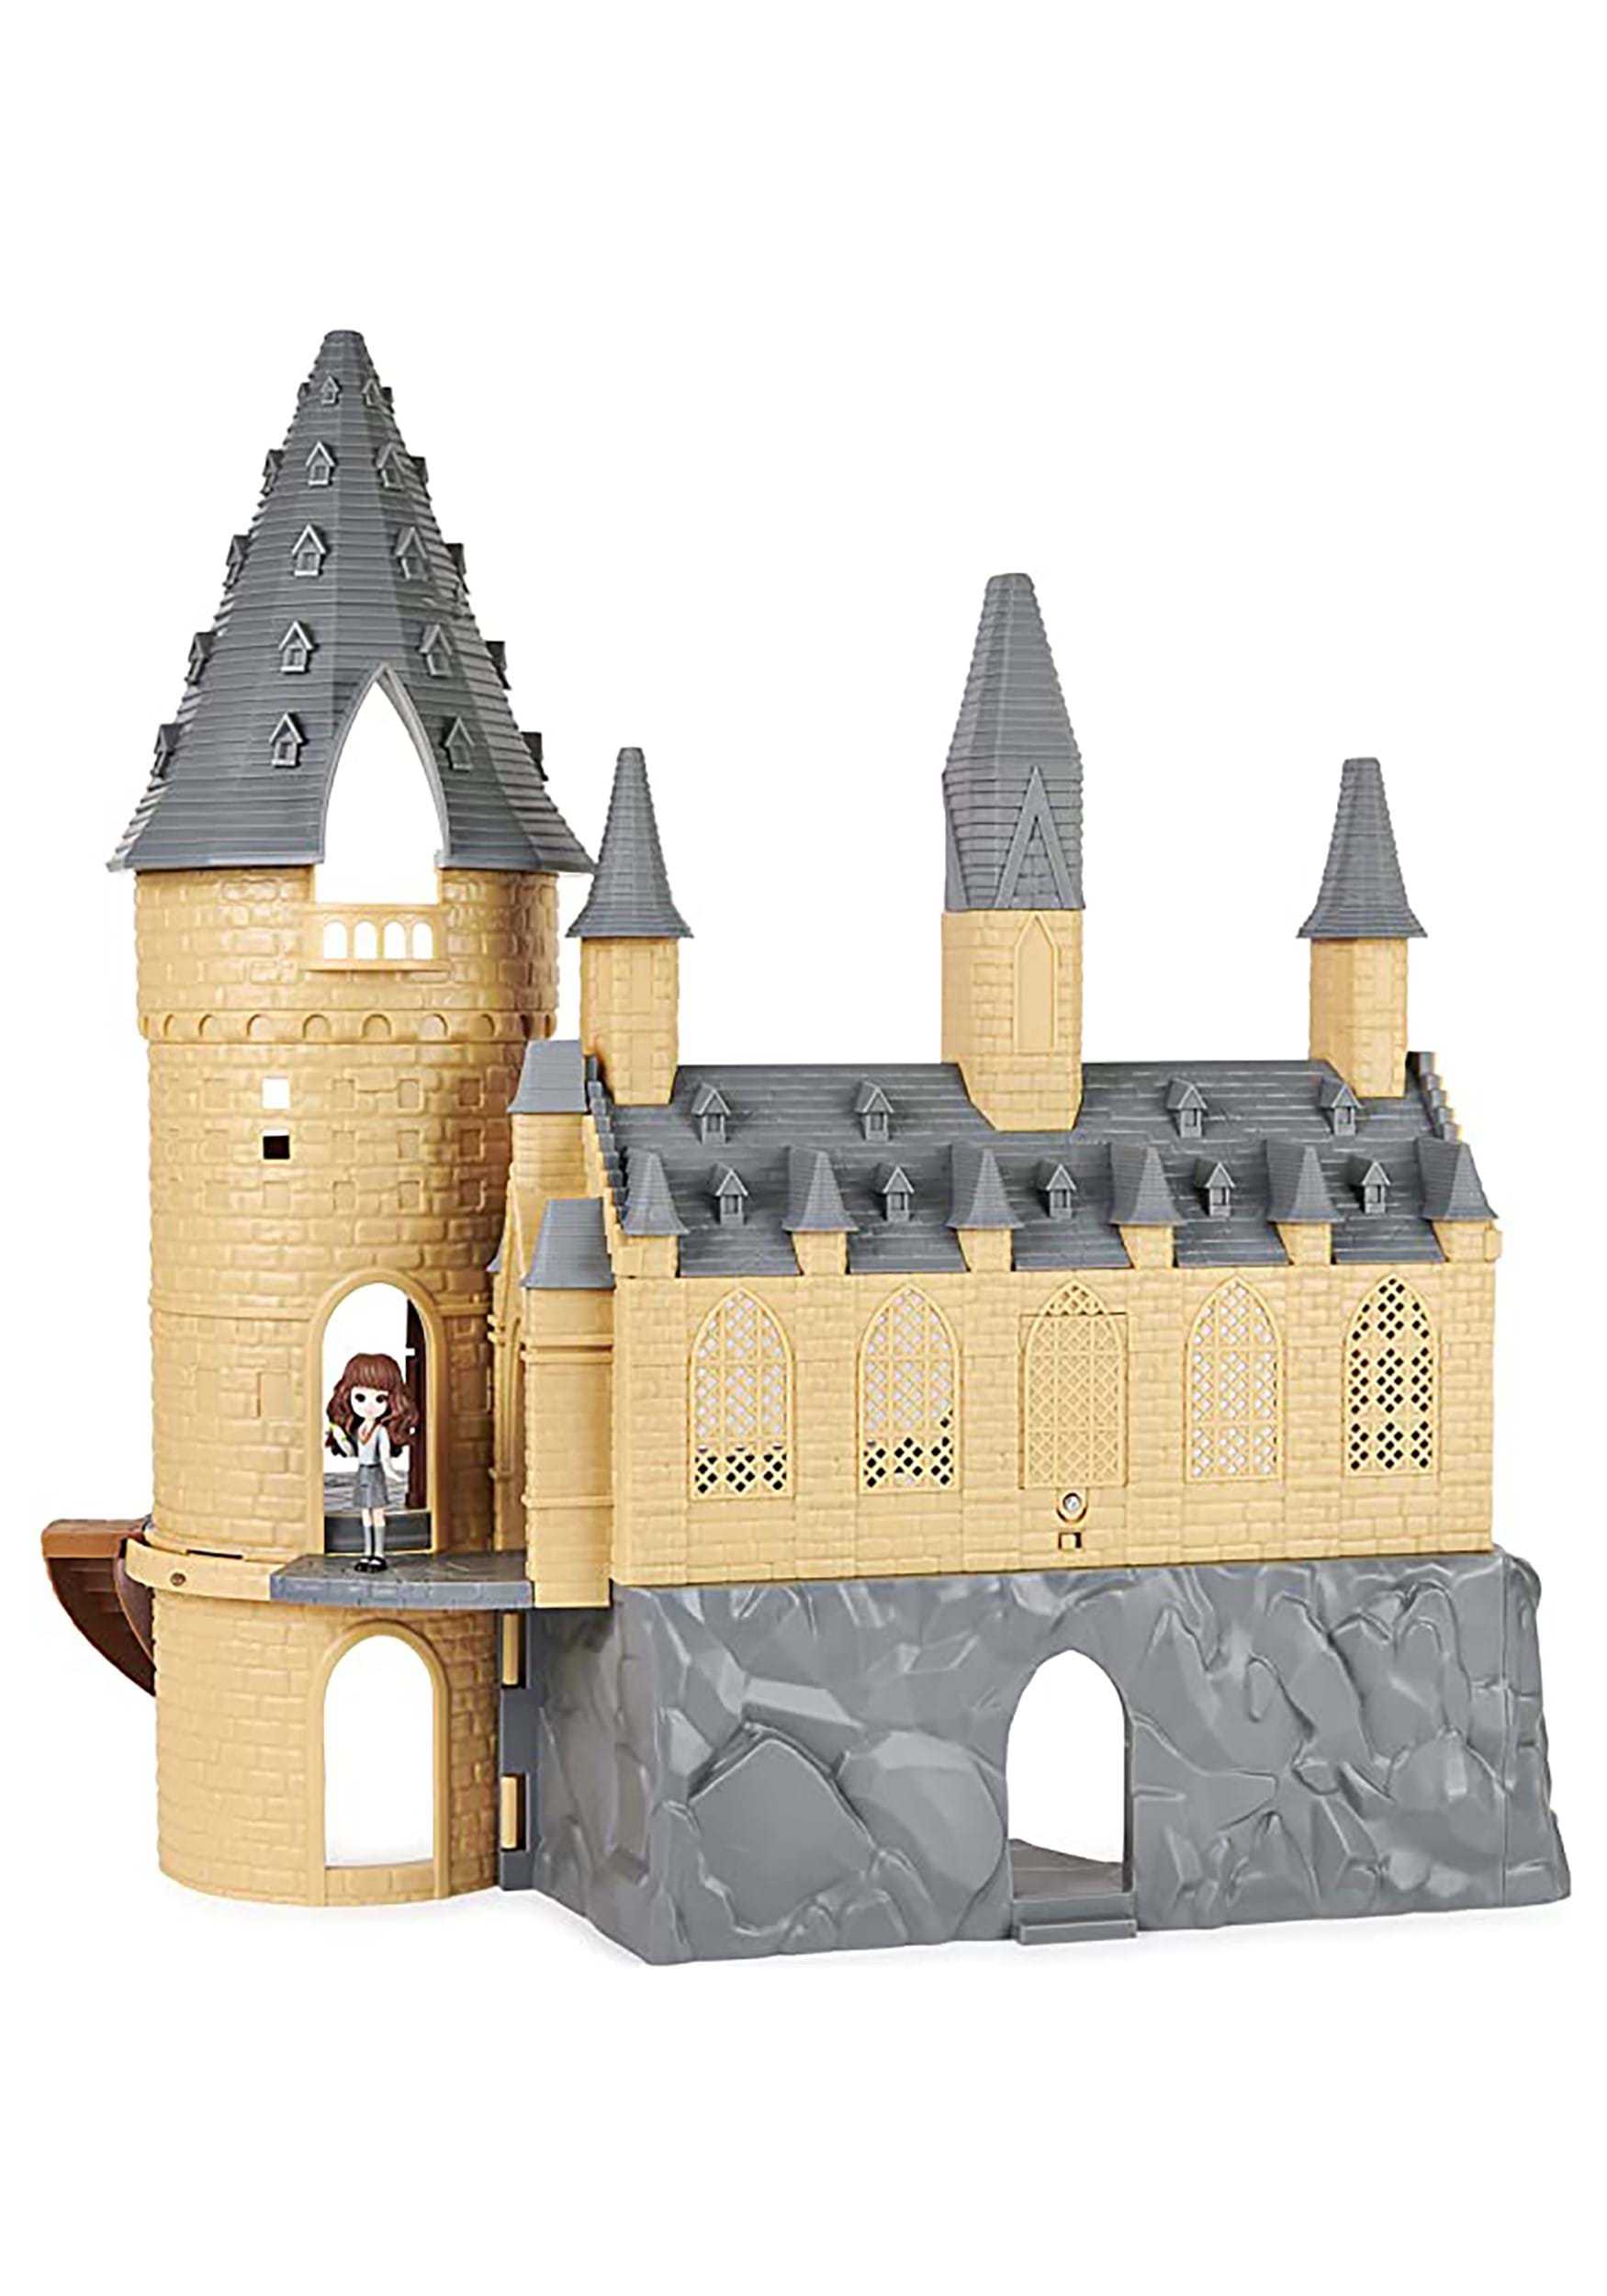 Magical Minis Wizarding World Of Harry Potter Hogwarts Castle Play Set